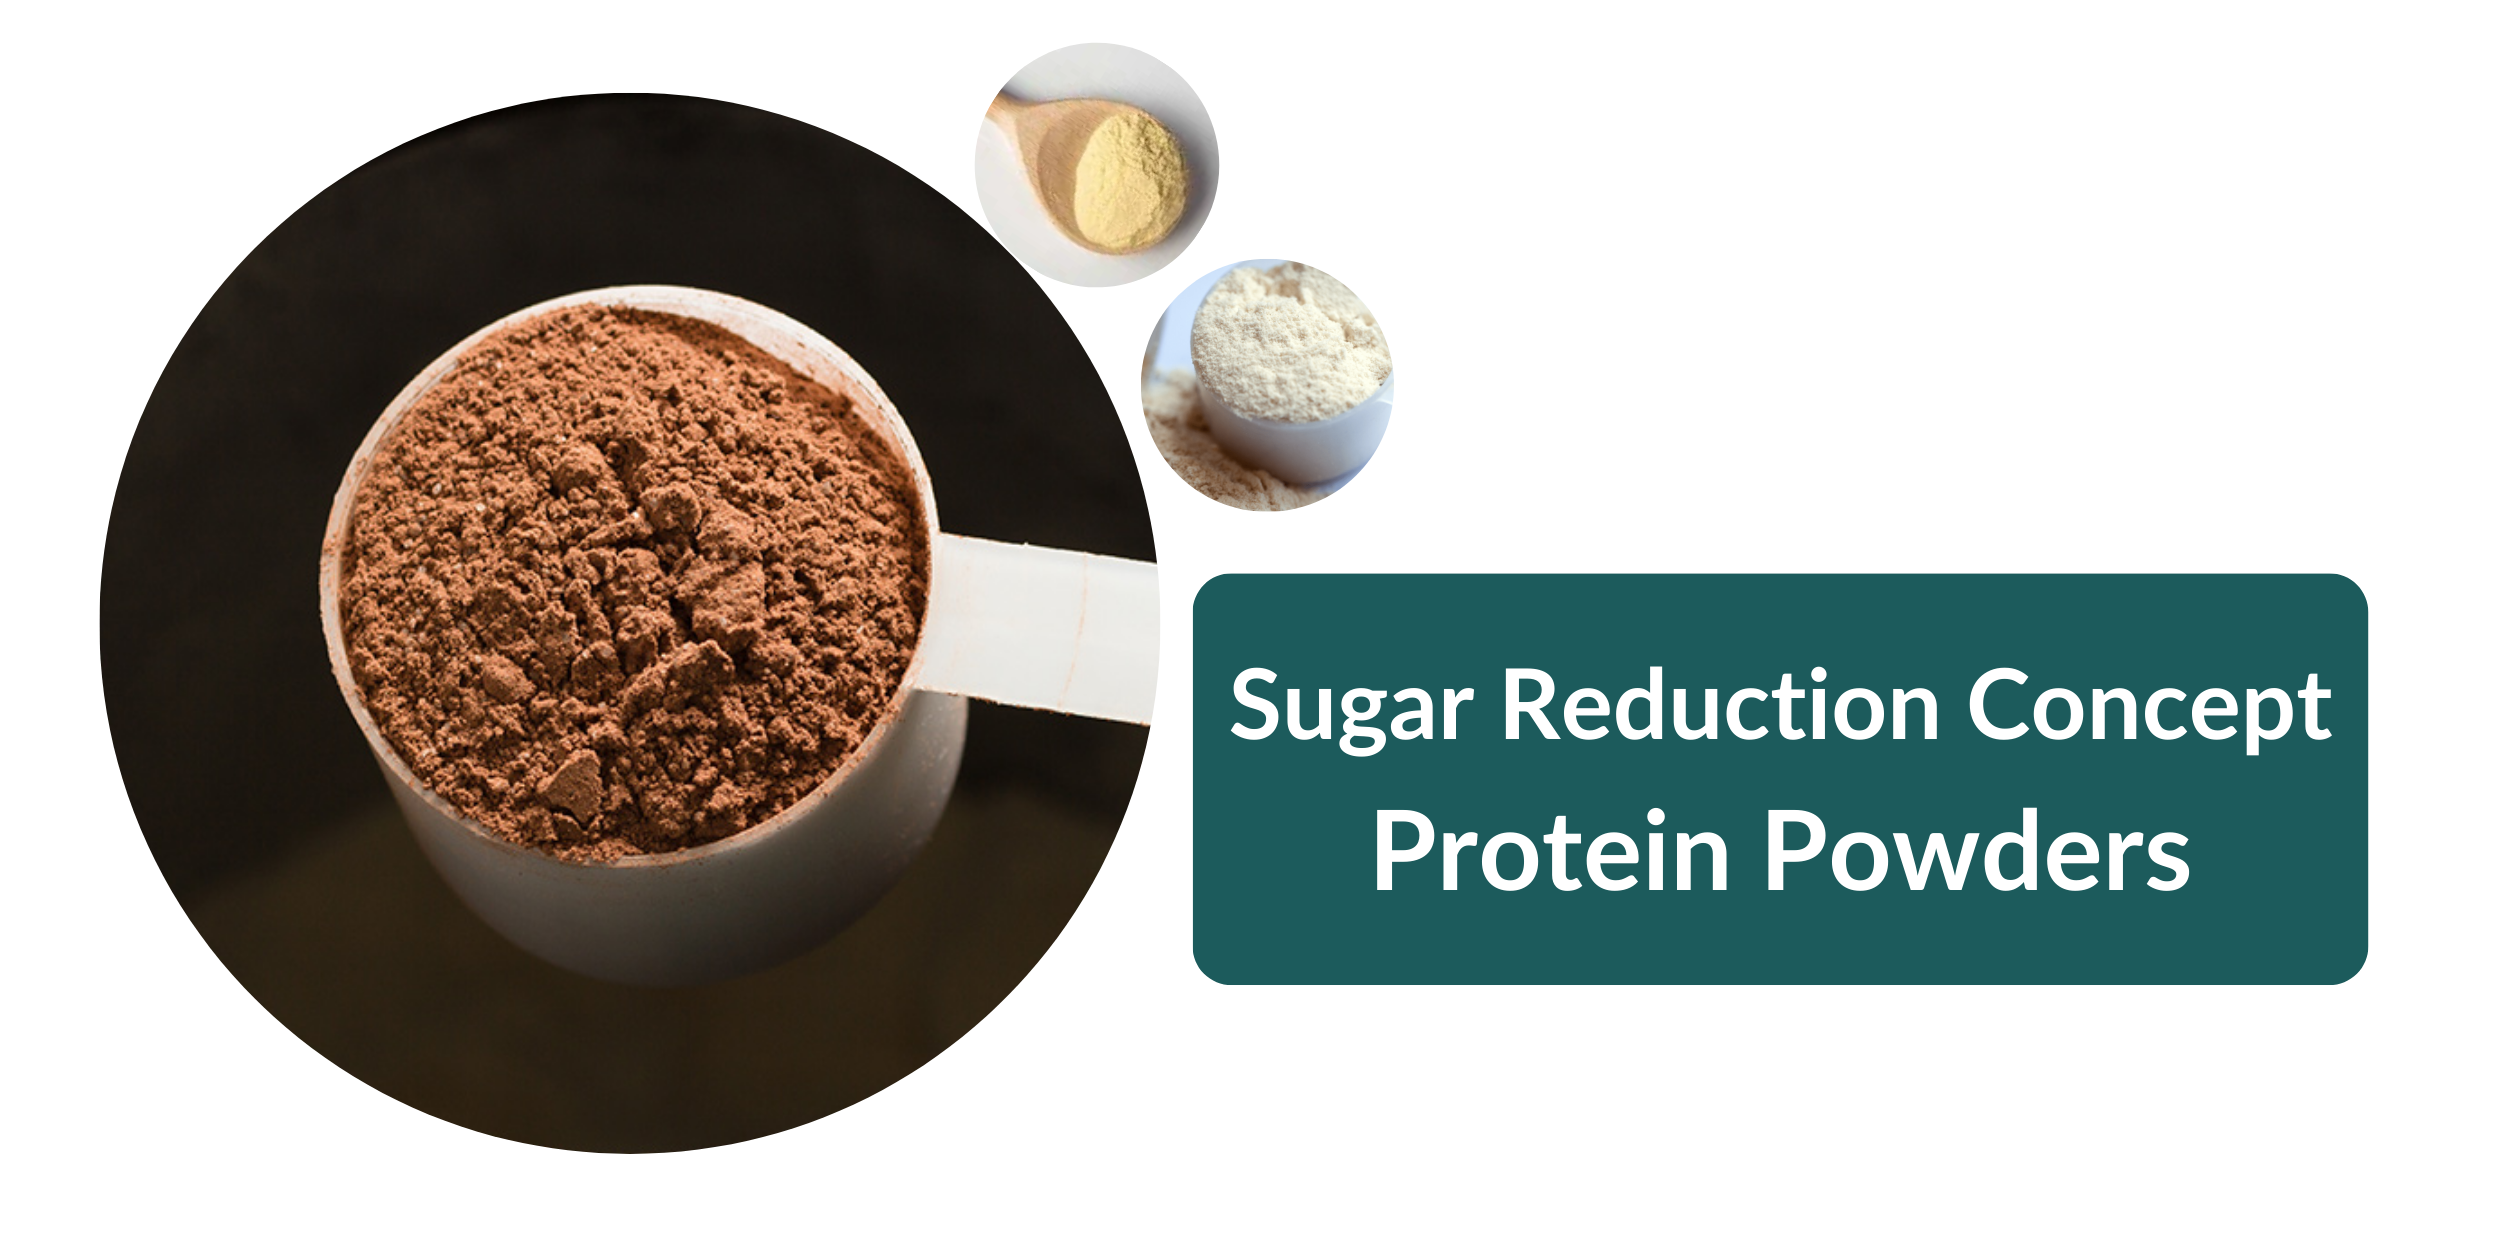 Sugar Reduction & Replacement Solutions for Protein Powders using Stevia Blends